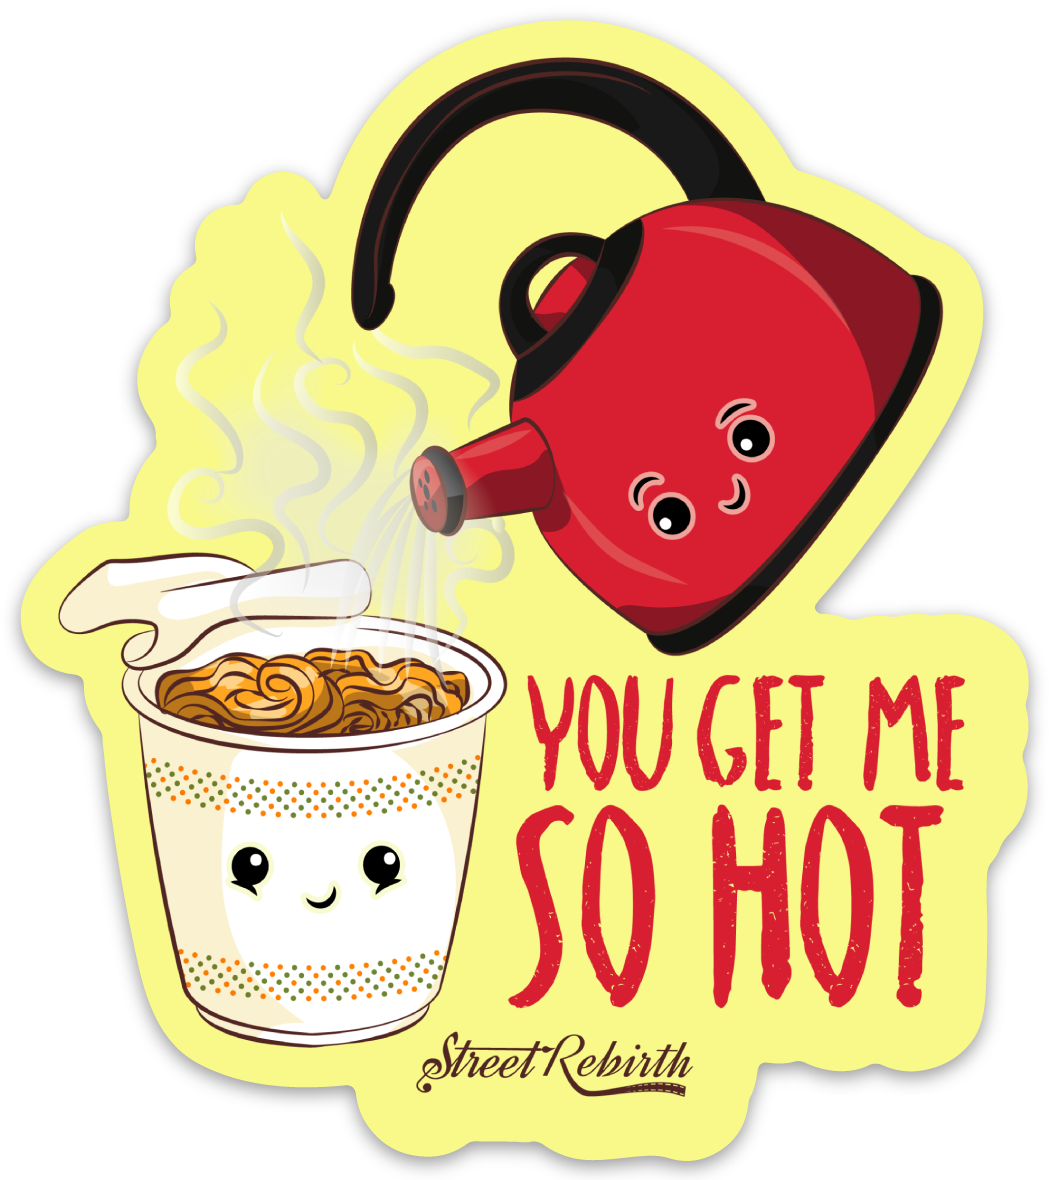 YOU GET ME SO HOT PUN STICKER – ONE 4 INCH WATER PROOF VINYL STICKER – FOR HYDRO FLASK, SKATEBOARD, LAPTOP, PLANNER, CAR, COLLECTING, GIFTING